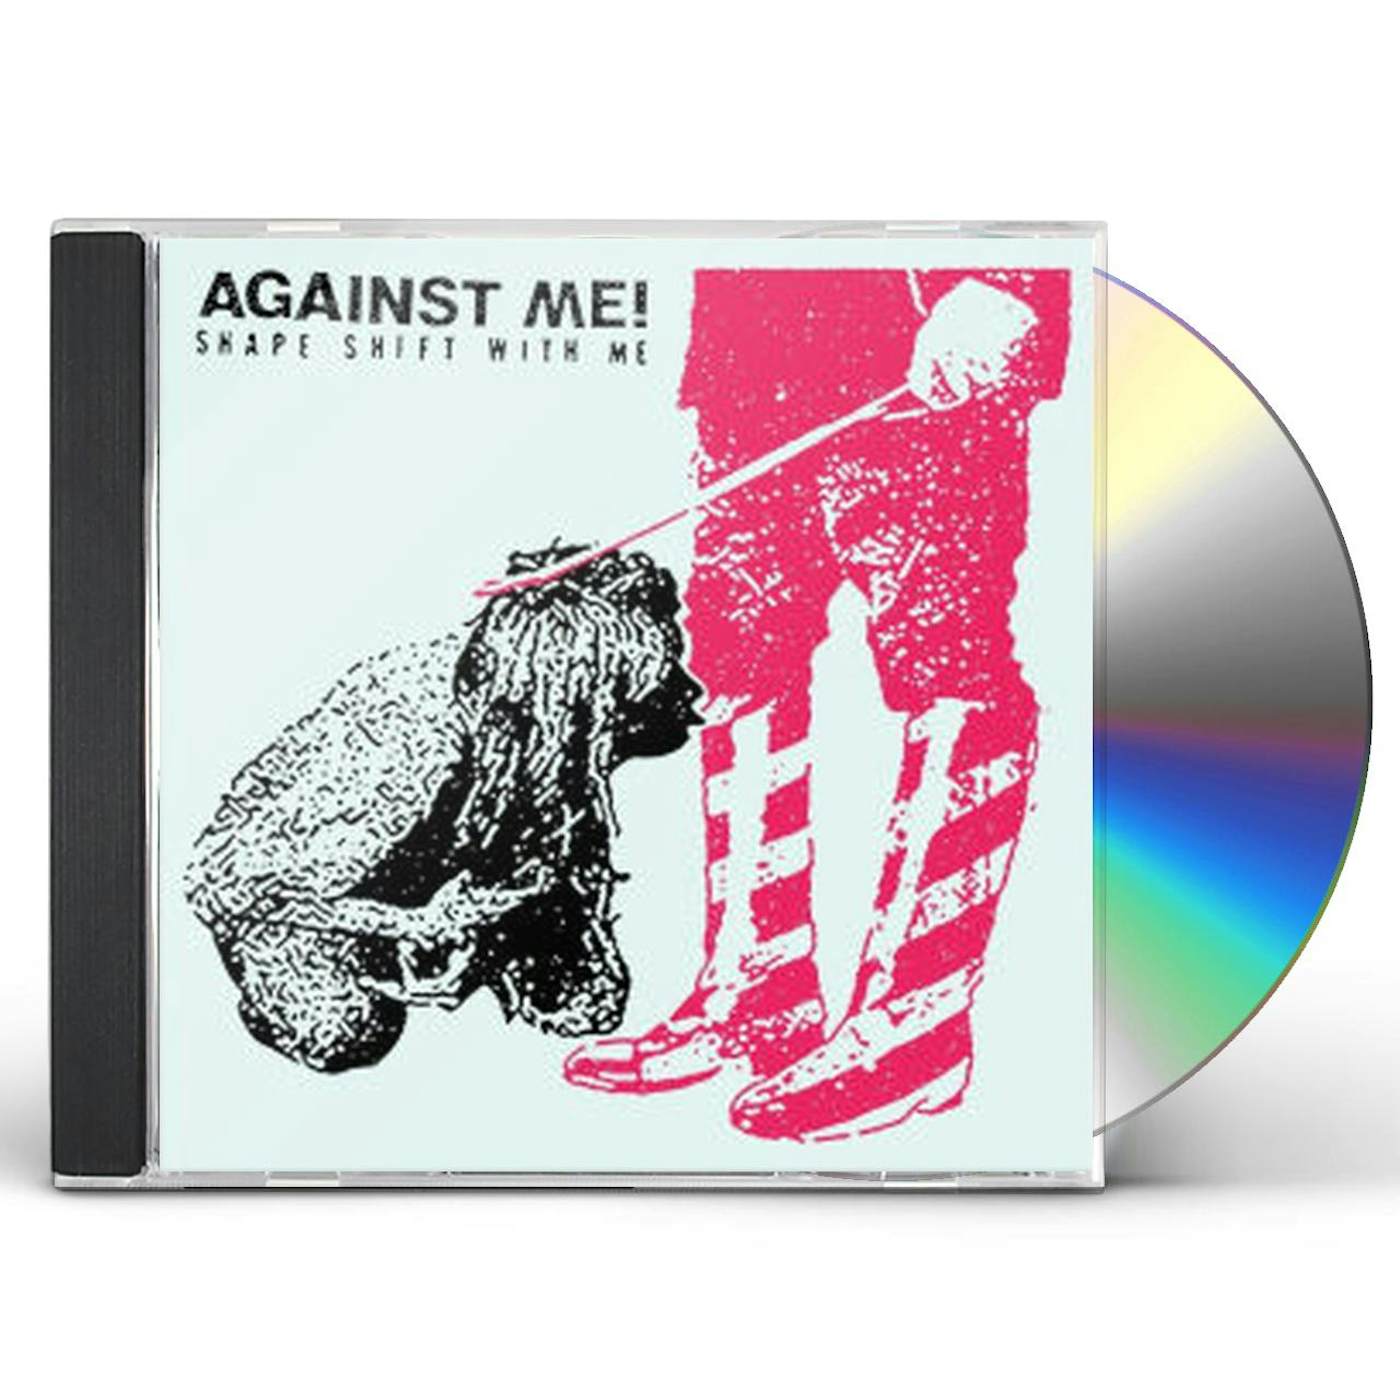 Against Me! SHAPE SHIFT WITH ME CD